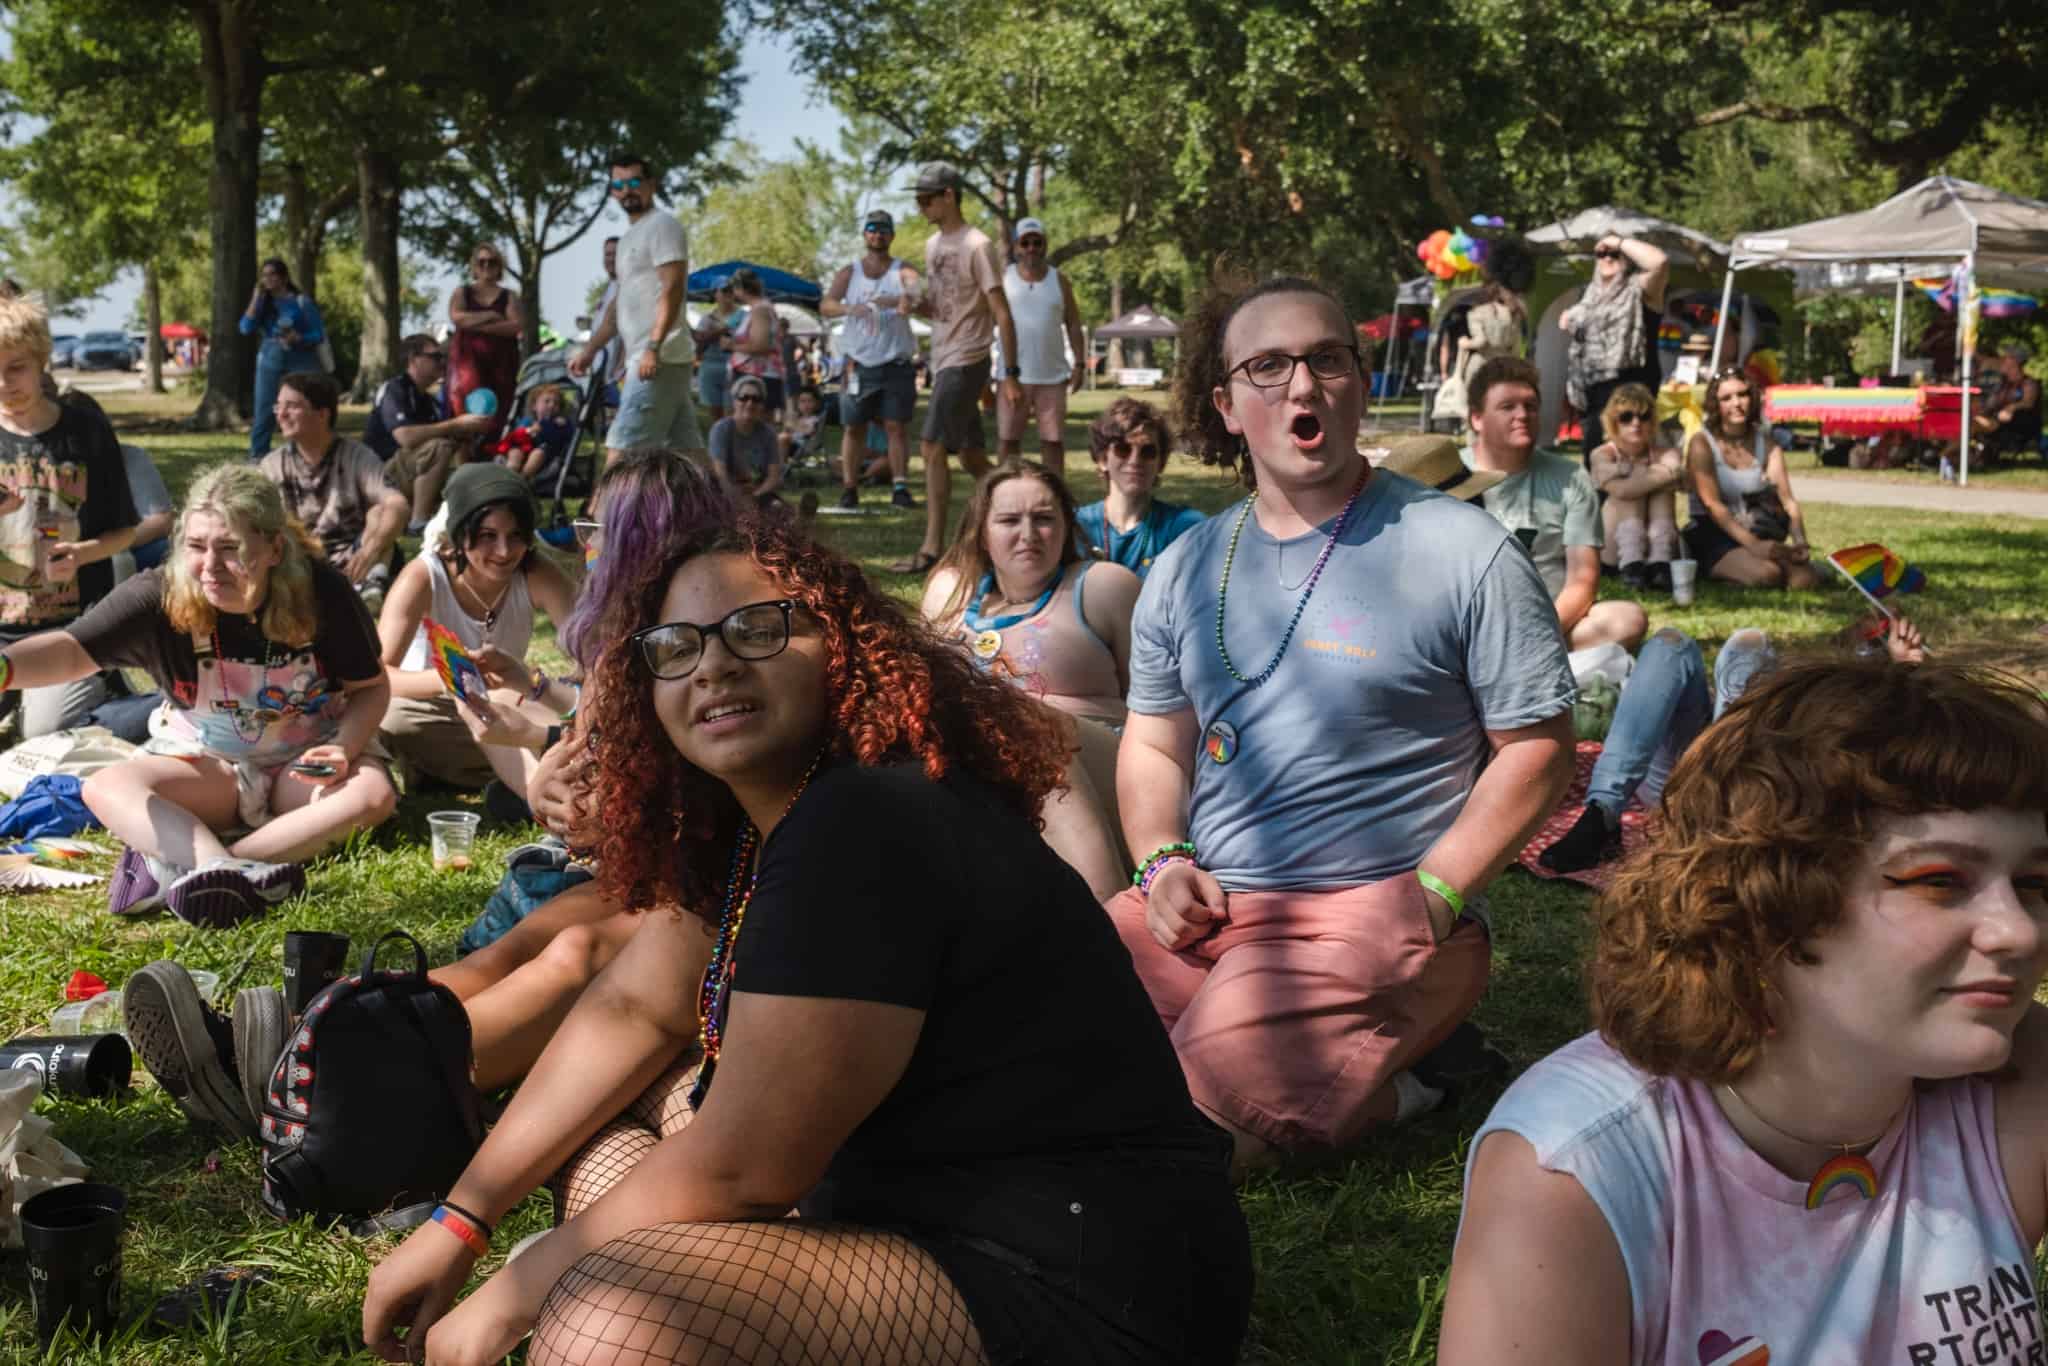 A diverse group of people sitting on grass at an outdoor event, listening attentively, with some holding pride flags.